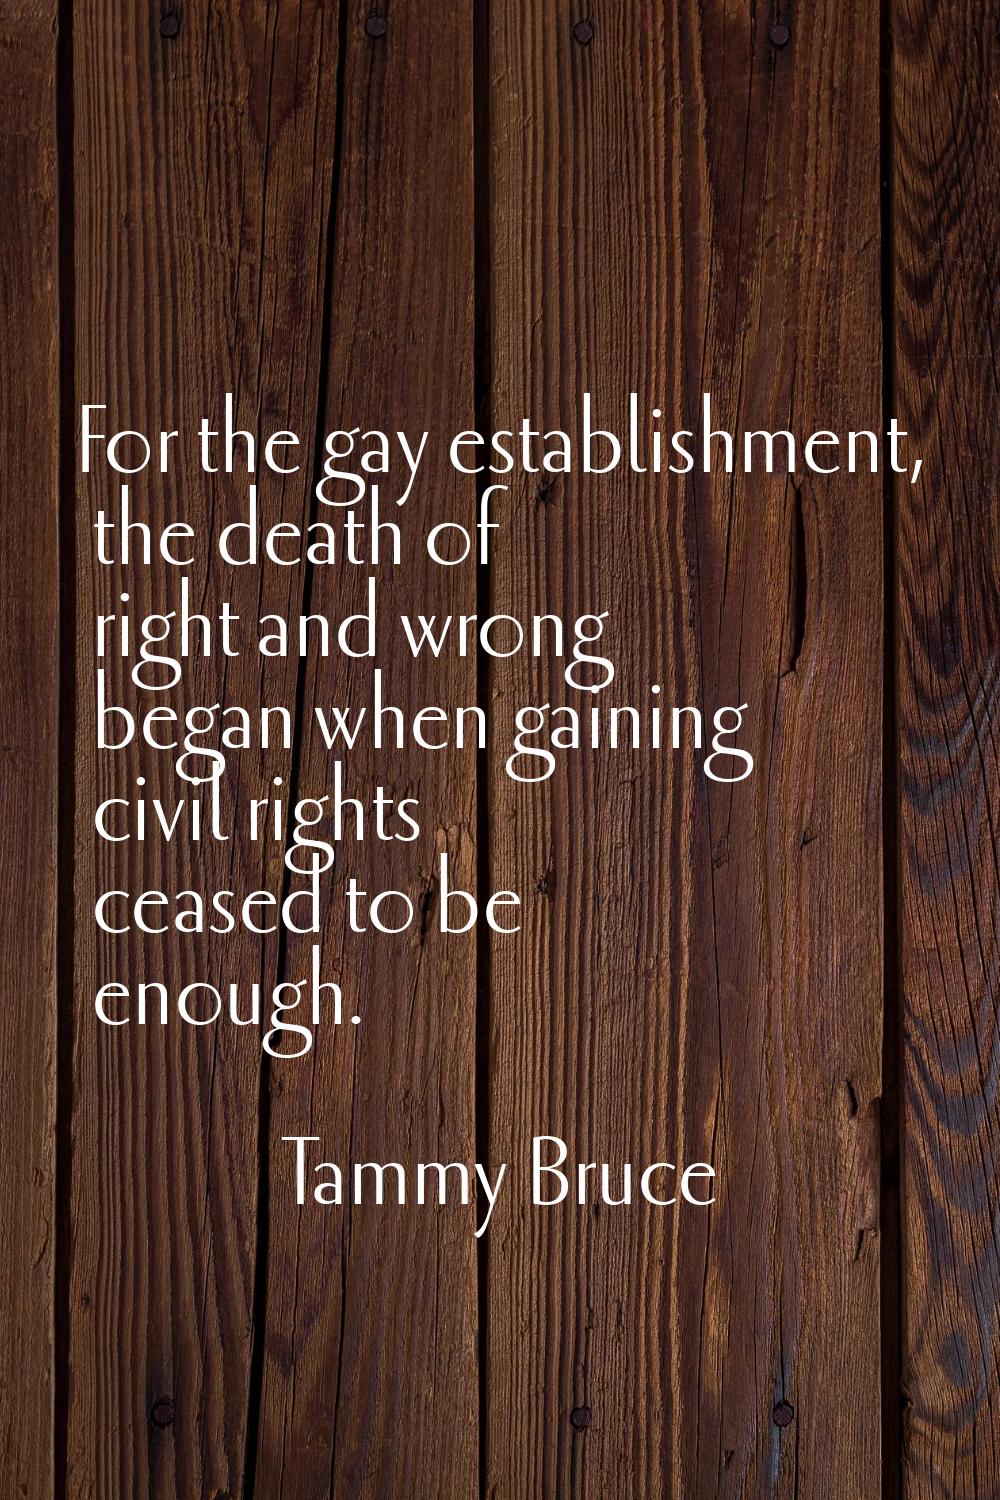 For the gay establishment, the death of right and wrong began when gaining civil rights ceased to b